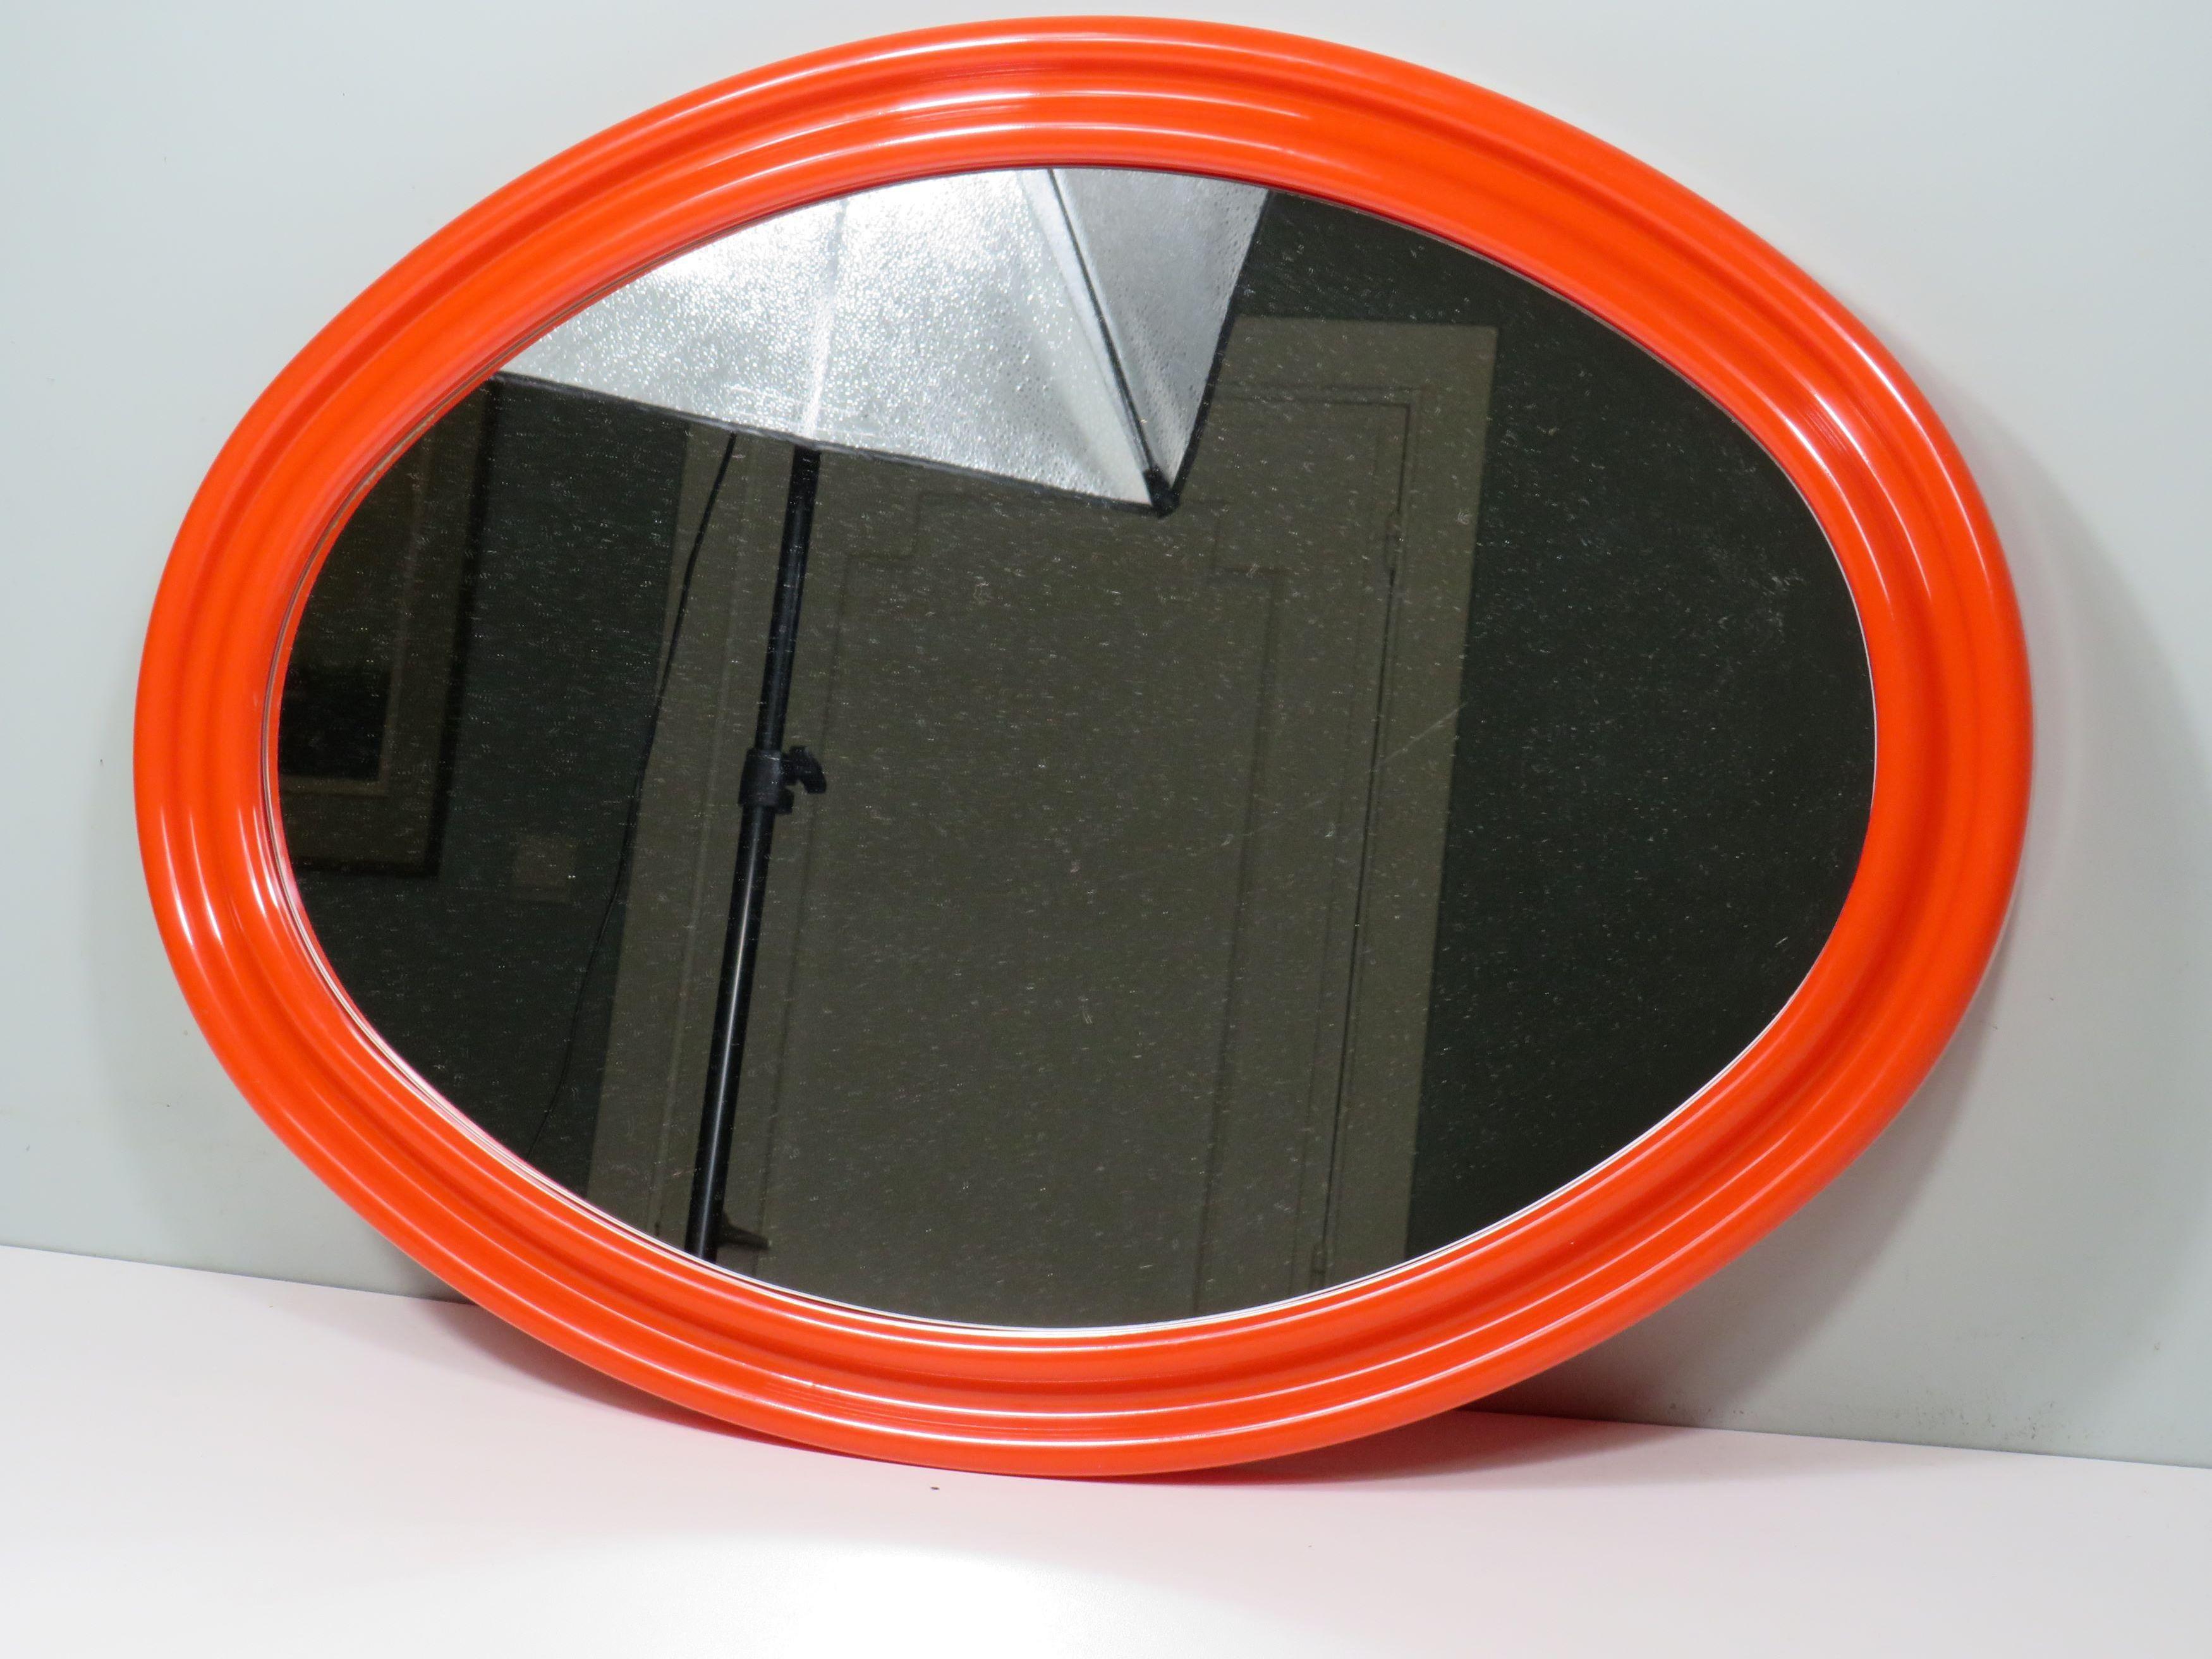 Large oval Space Age/Pop Art mirror in the style of Guzzini and Verner Panton.
The mirror glass is inlaid in the molded plastic shape with an intense orange color and the back has 2 mounting holes so that the mirror can be hung both horizontally and